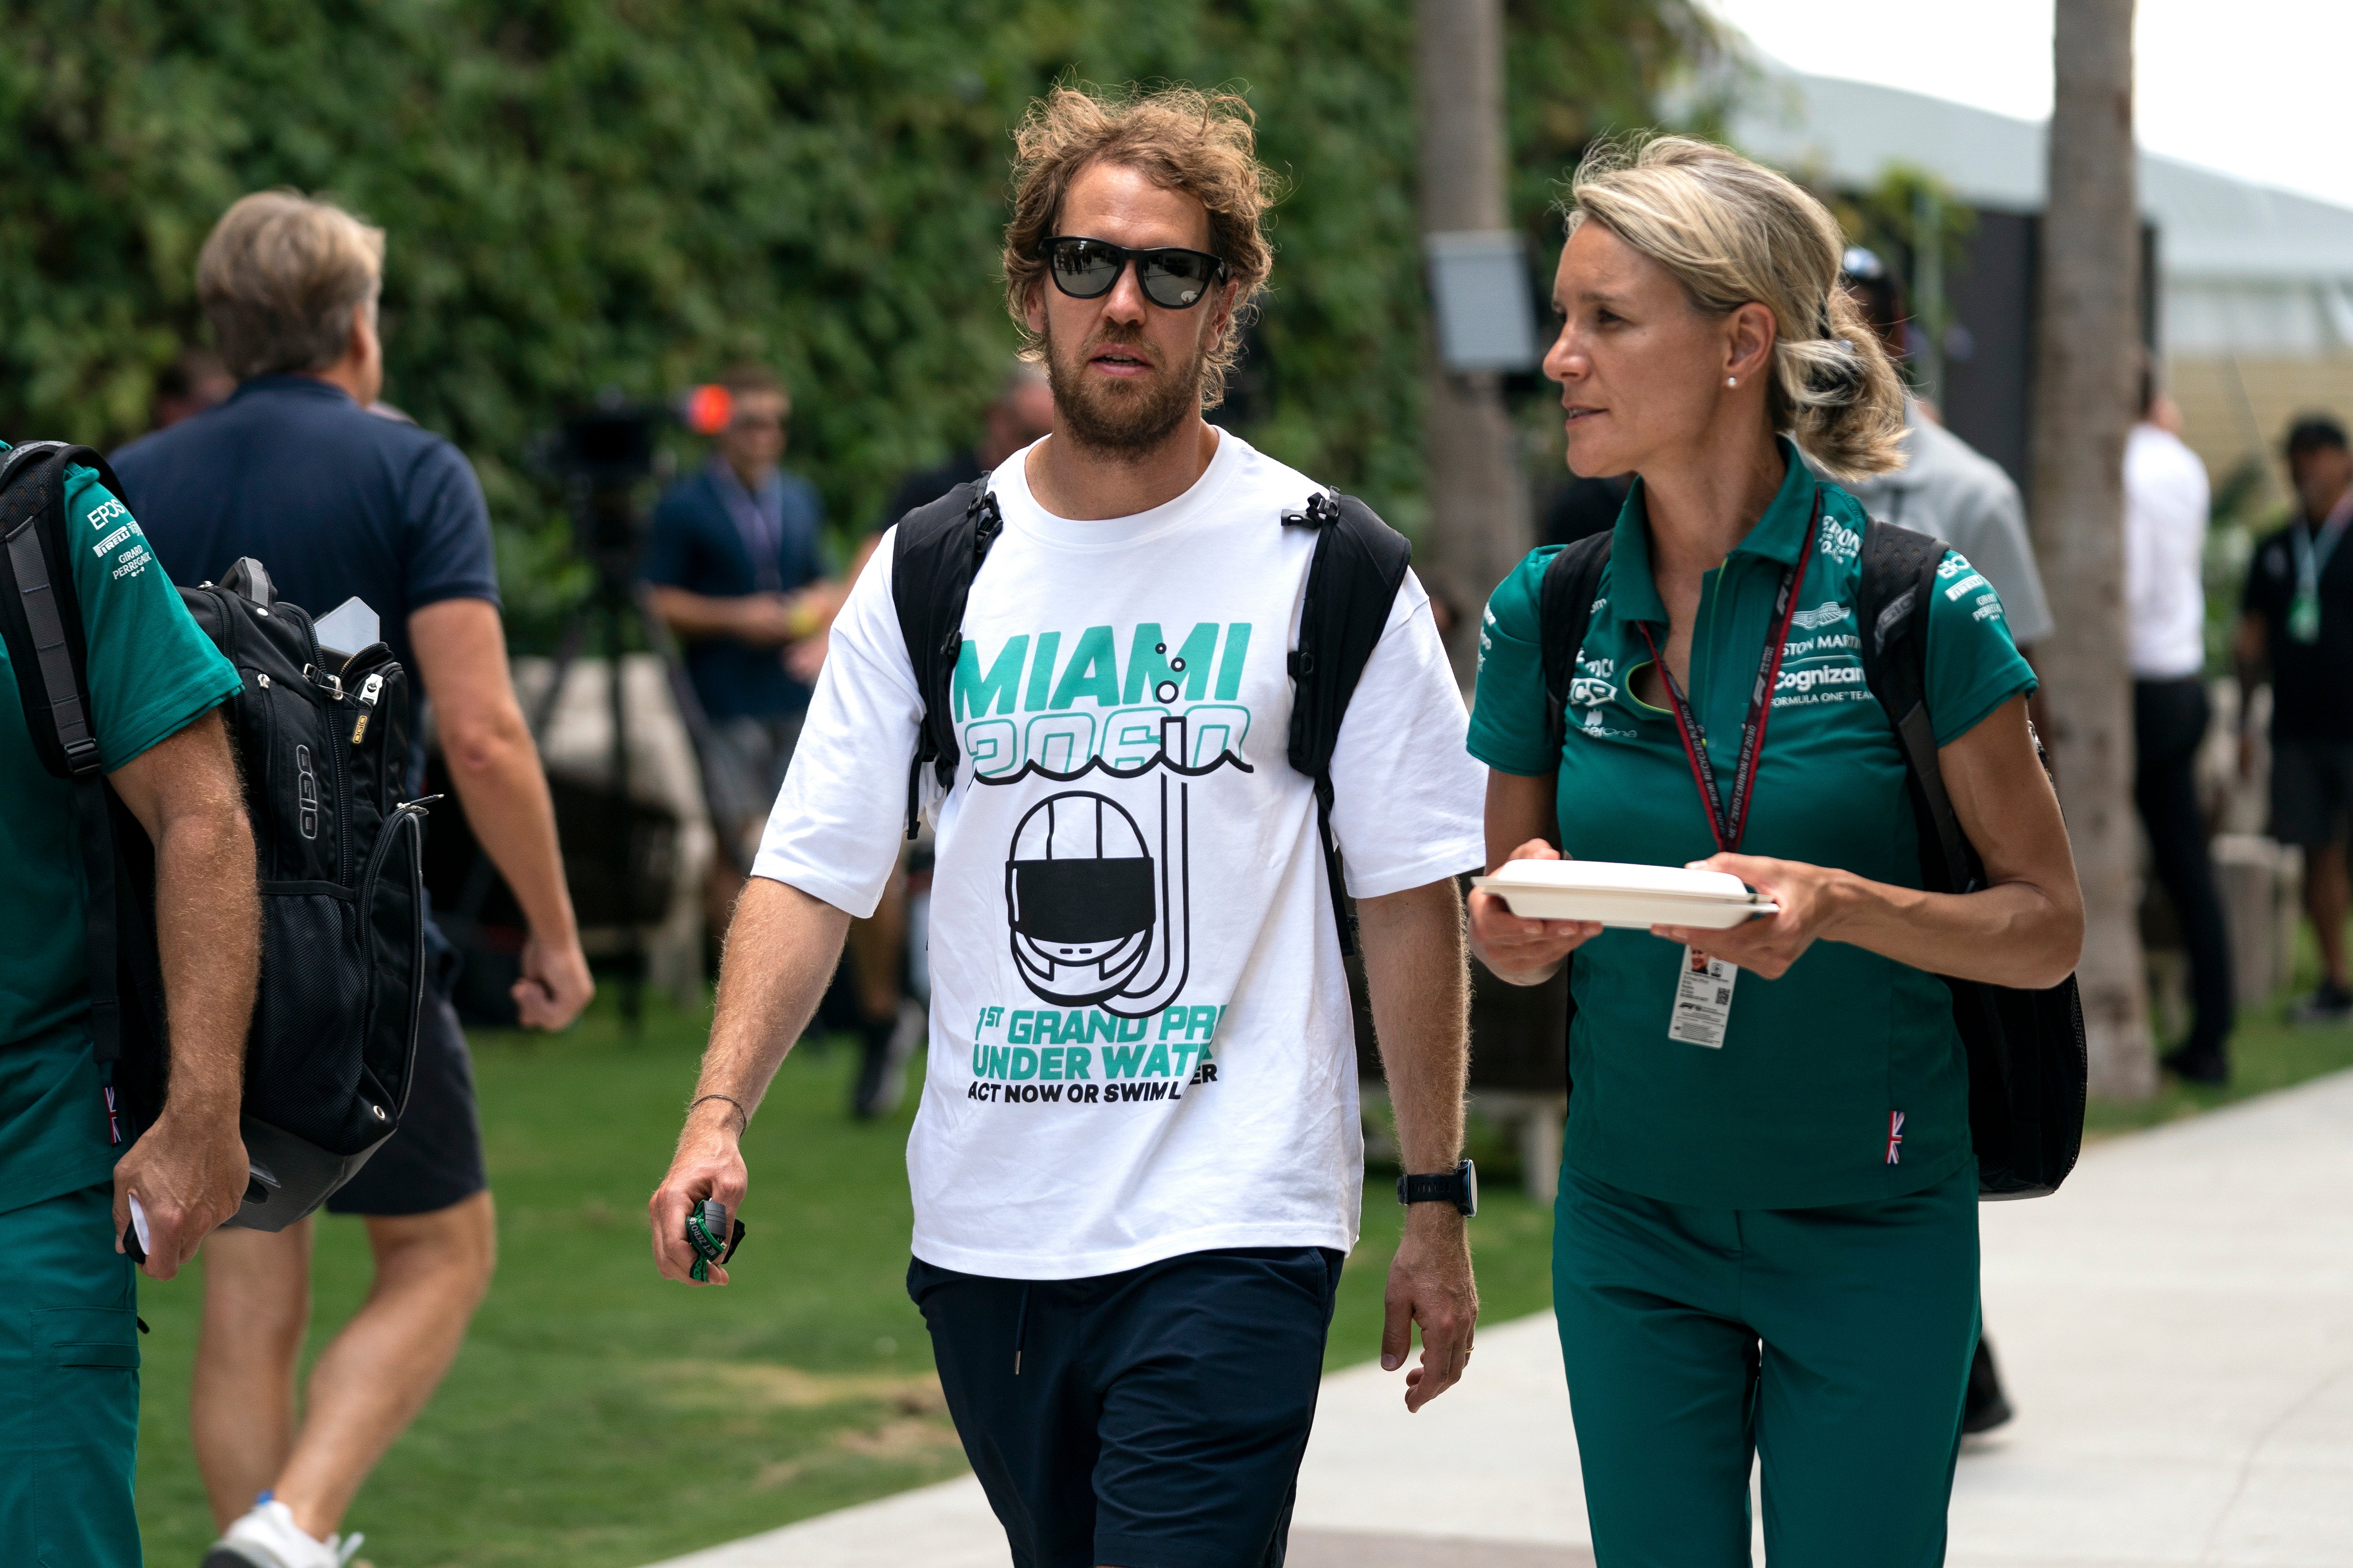 Vettel made his feelings clear with a T-shirt in Miami